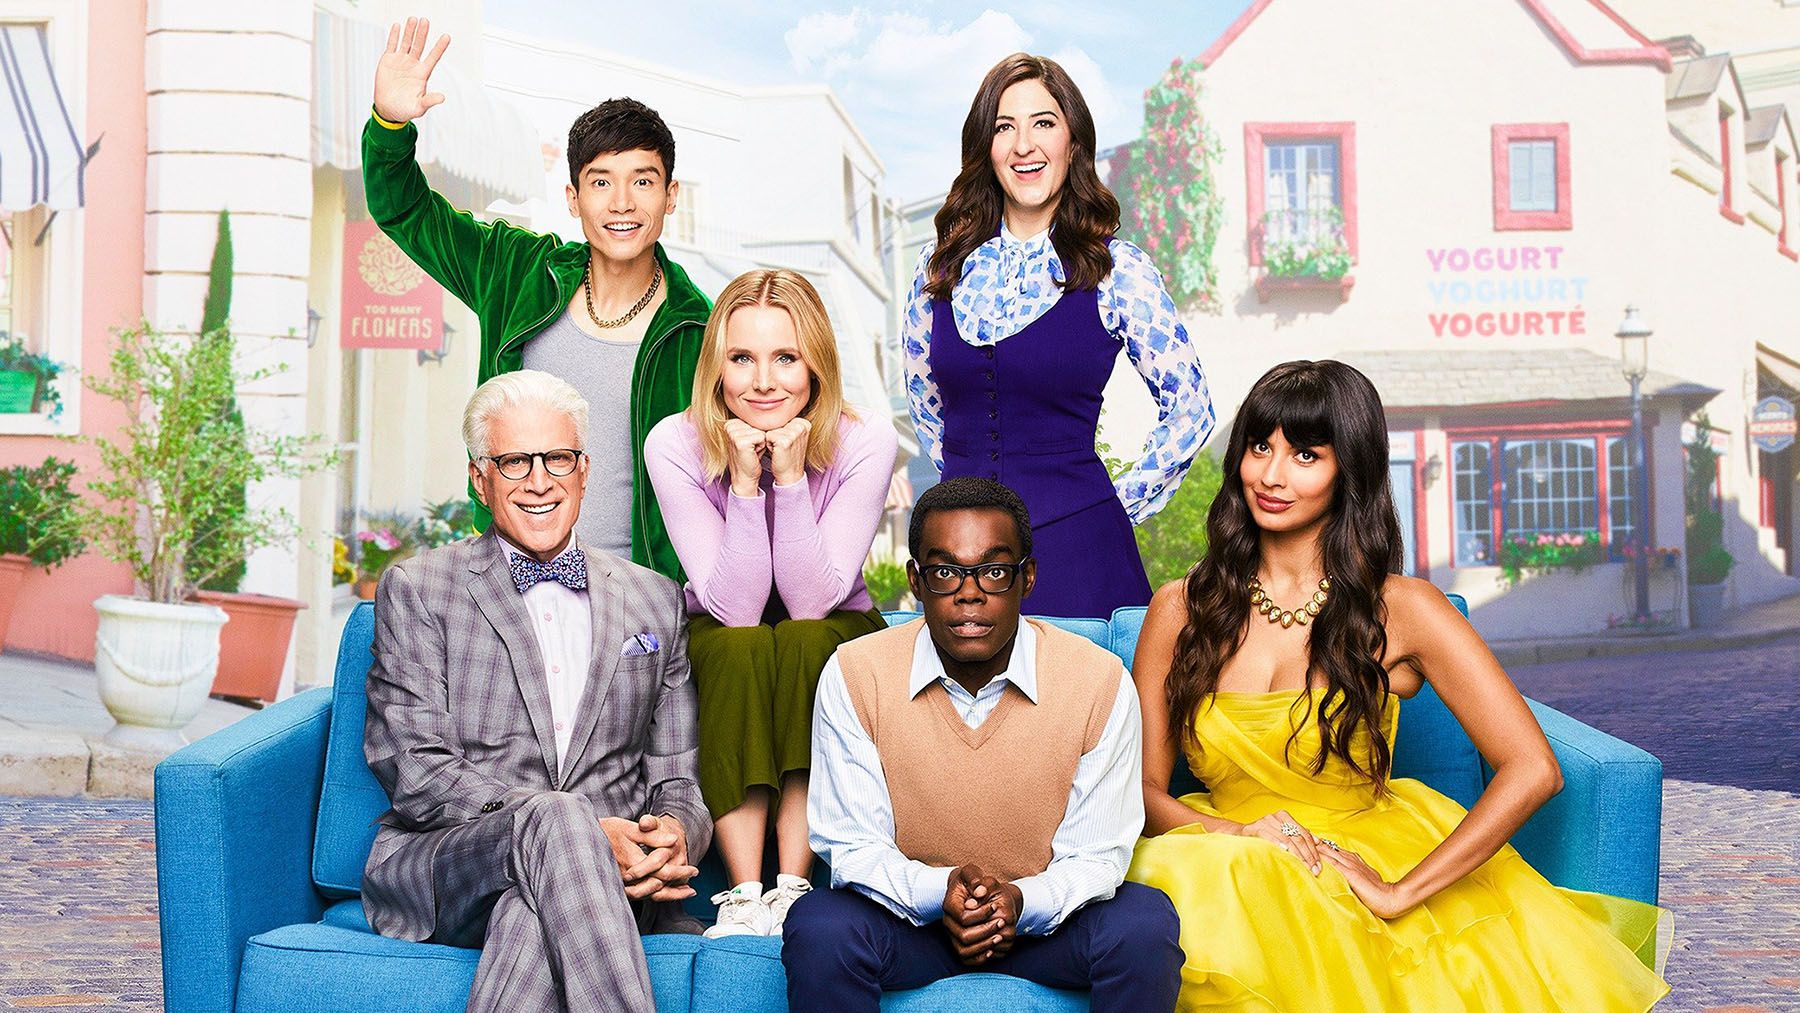 The cast of the TV show The Good Place are seated on a couch in the town square of the afterlife.